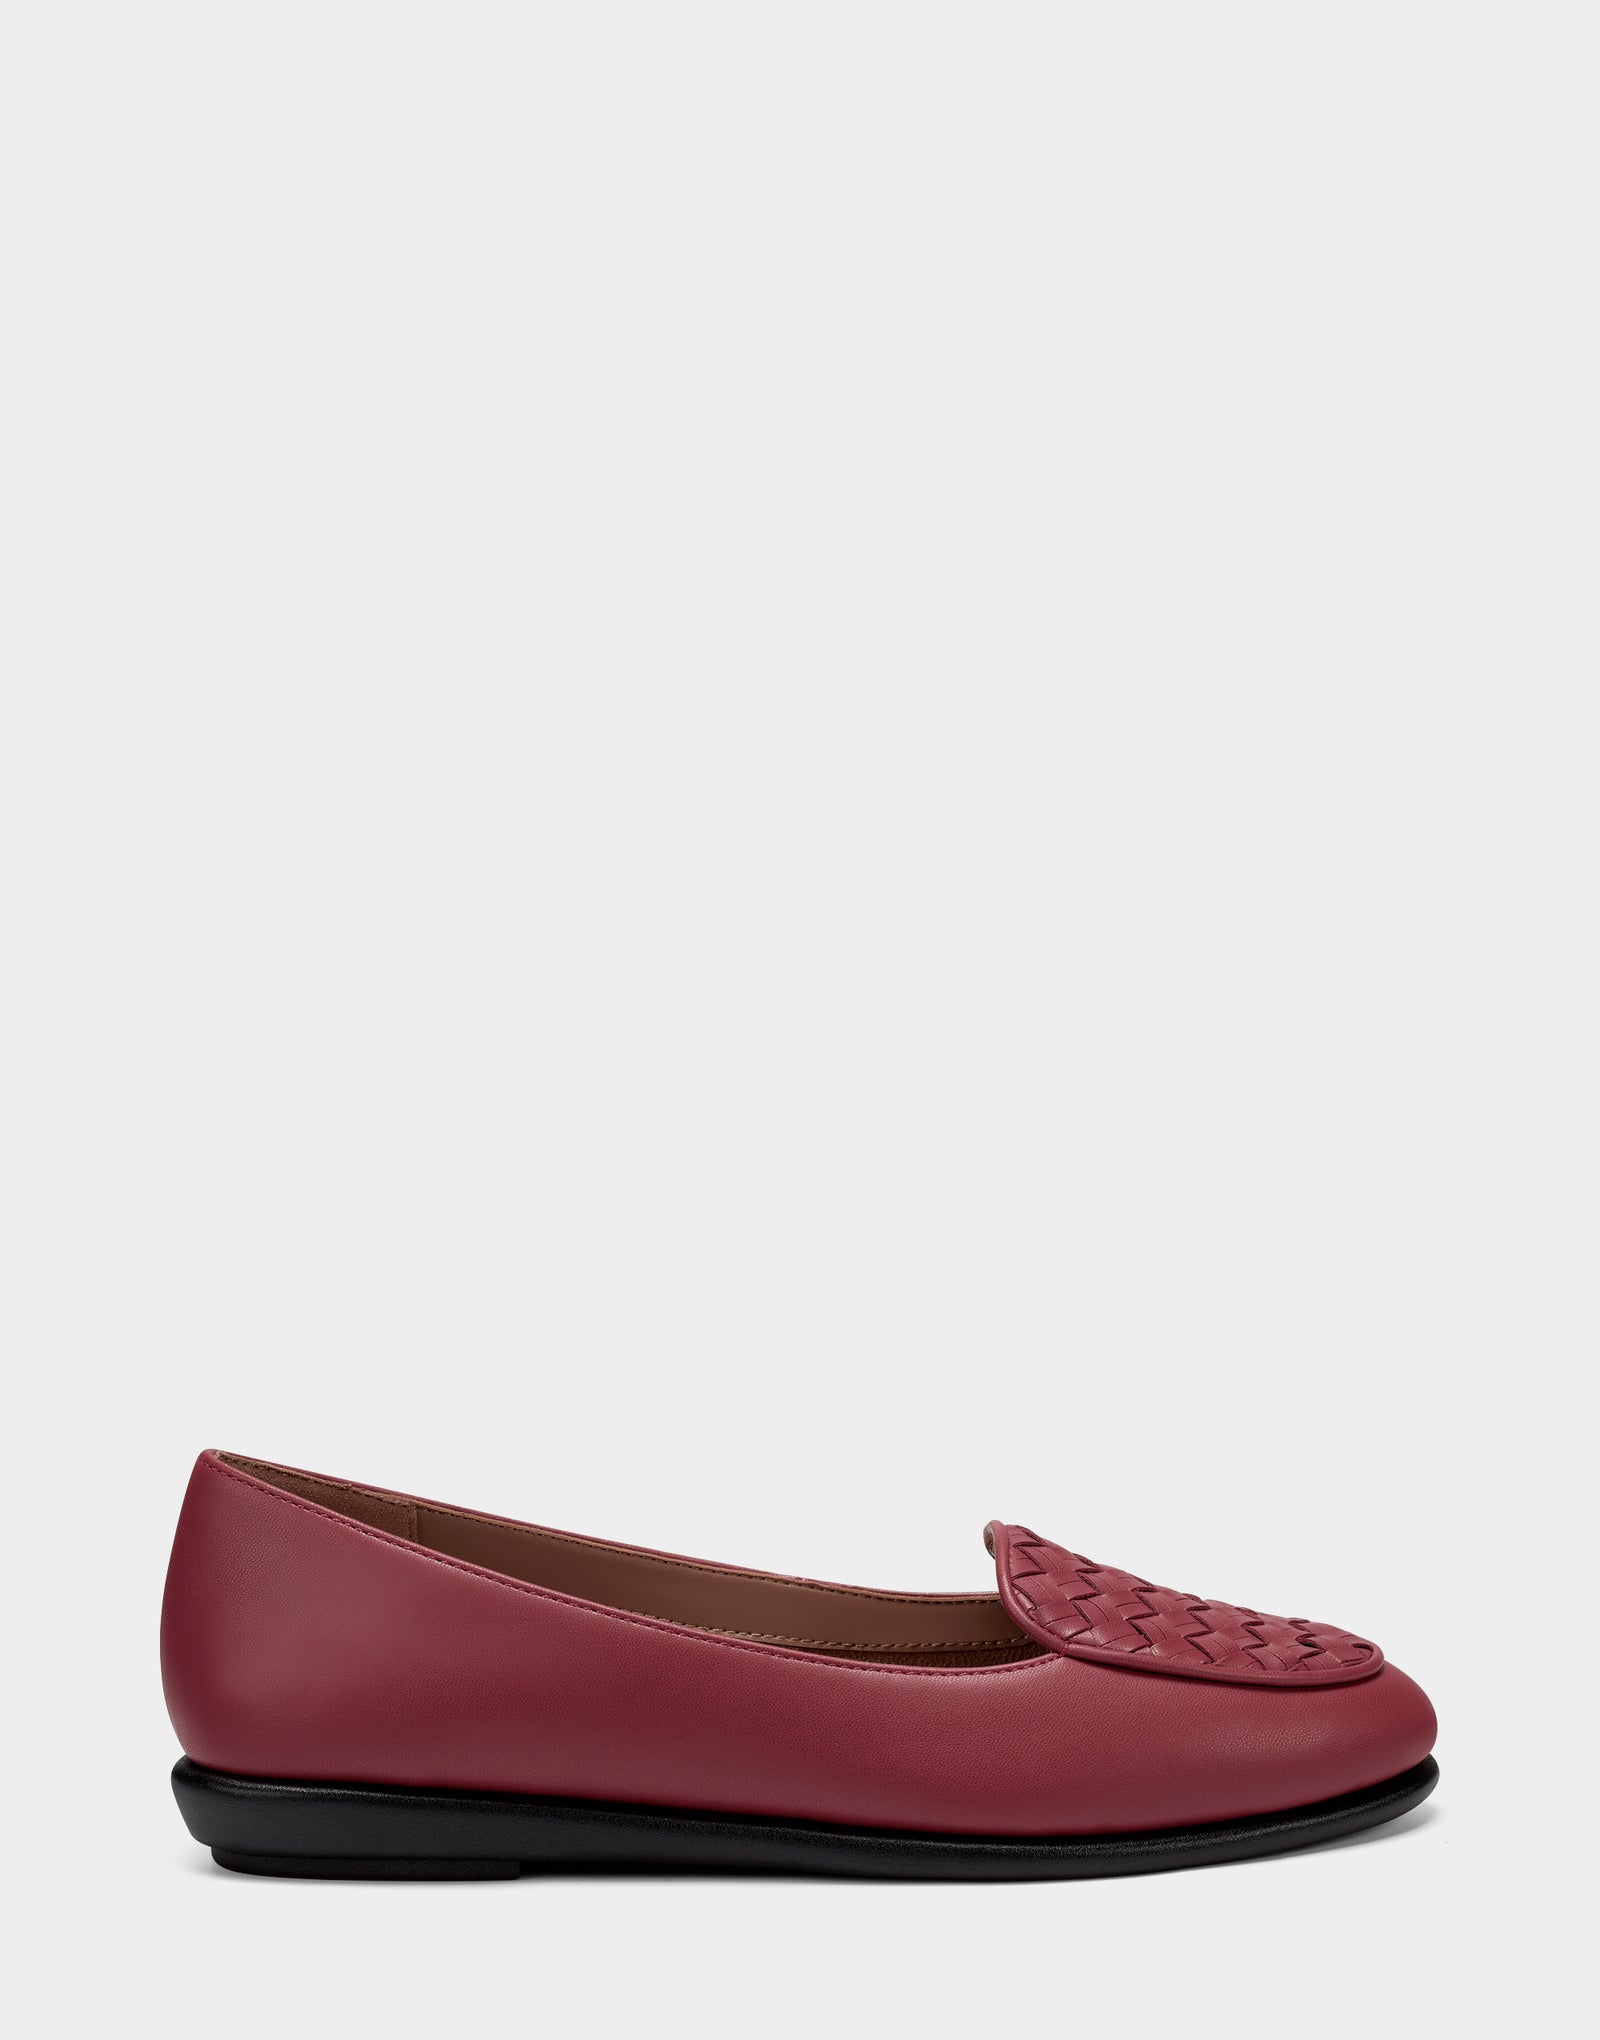 Women's Loafer in Red